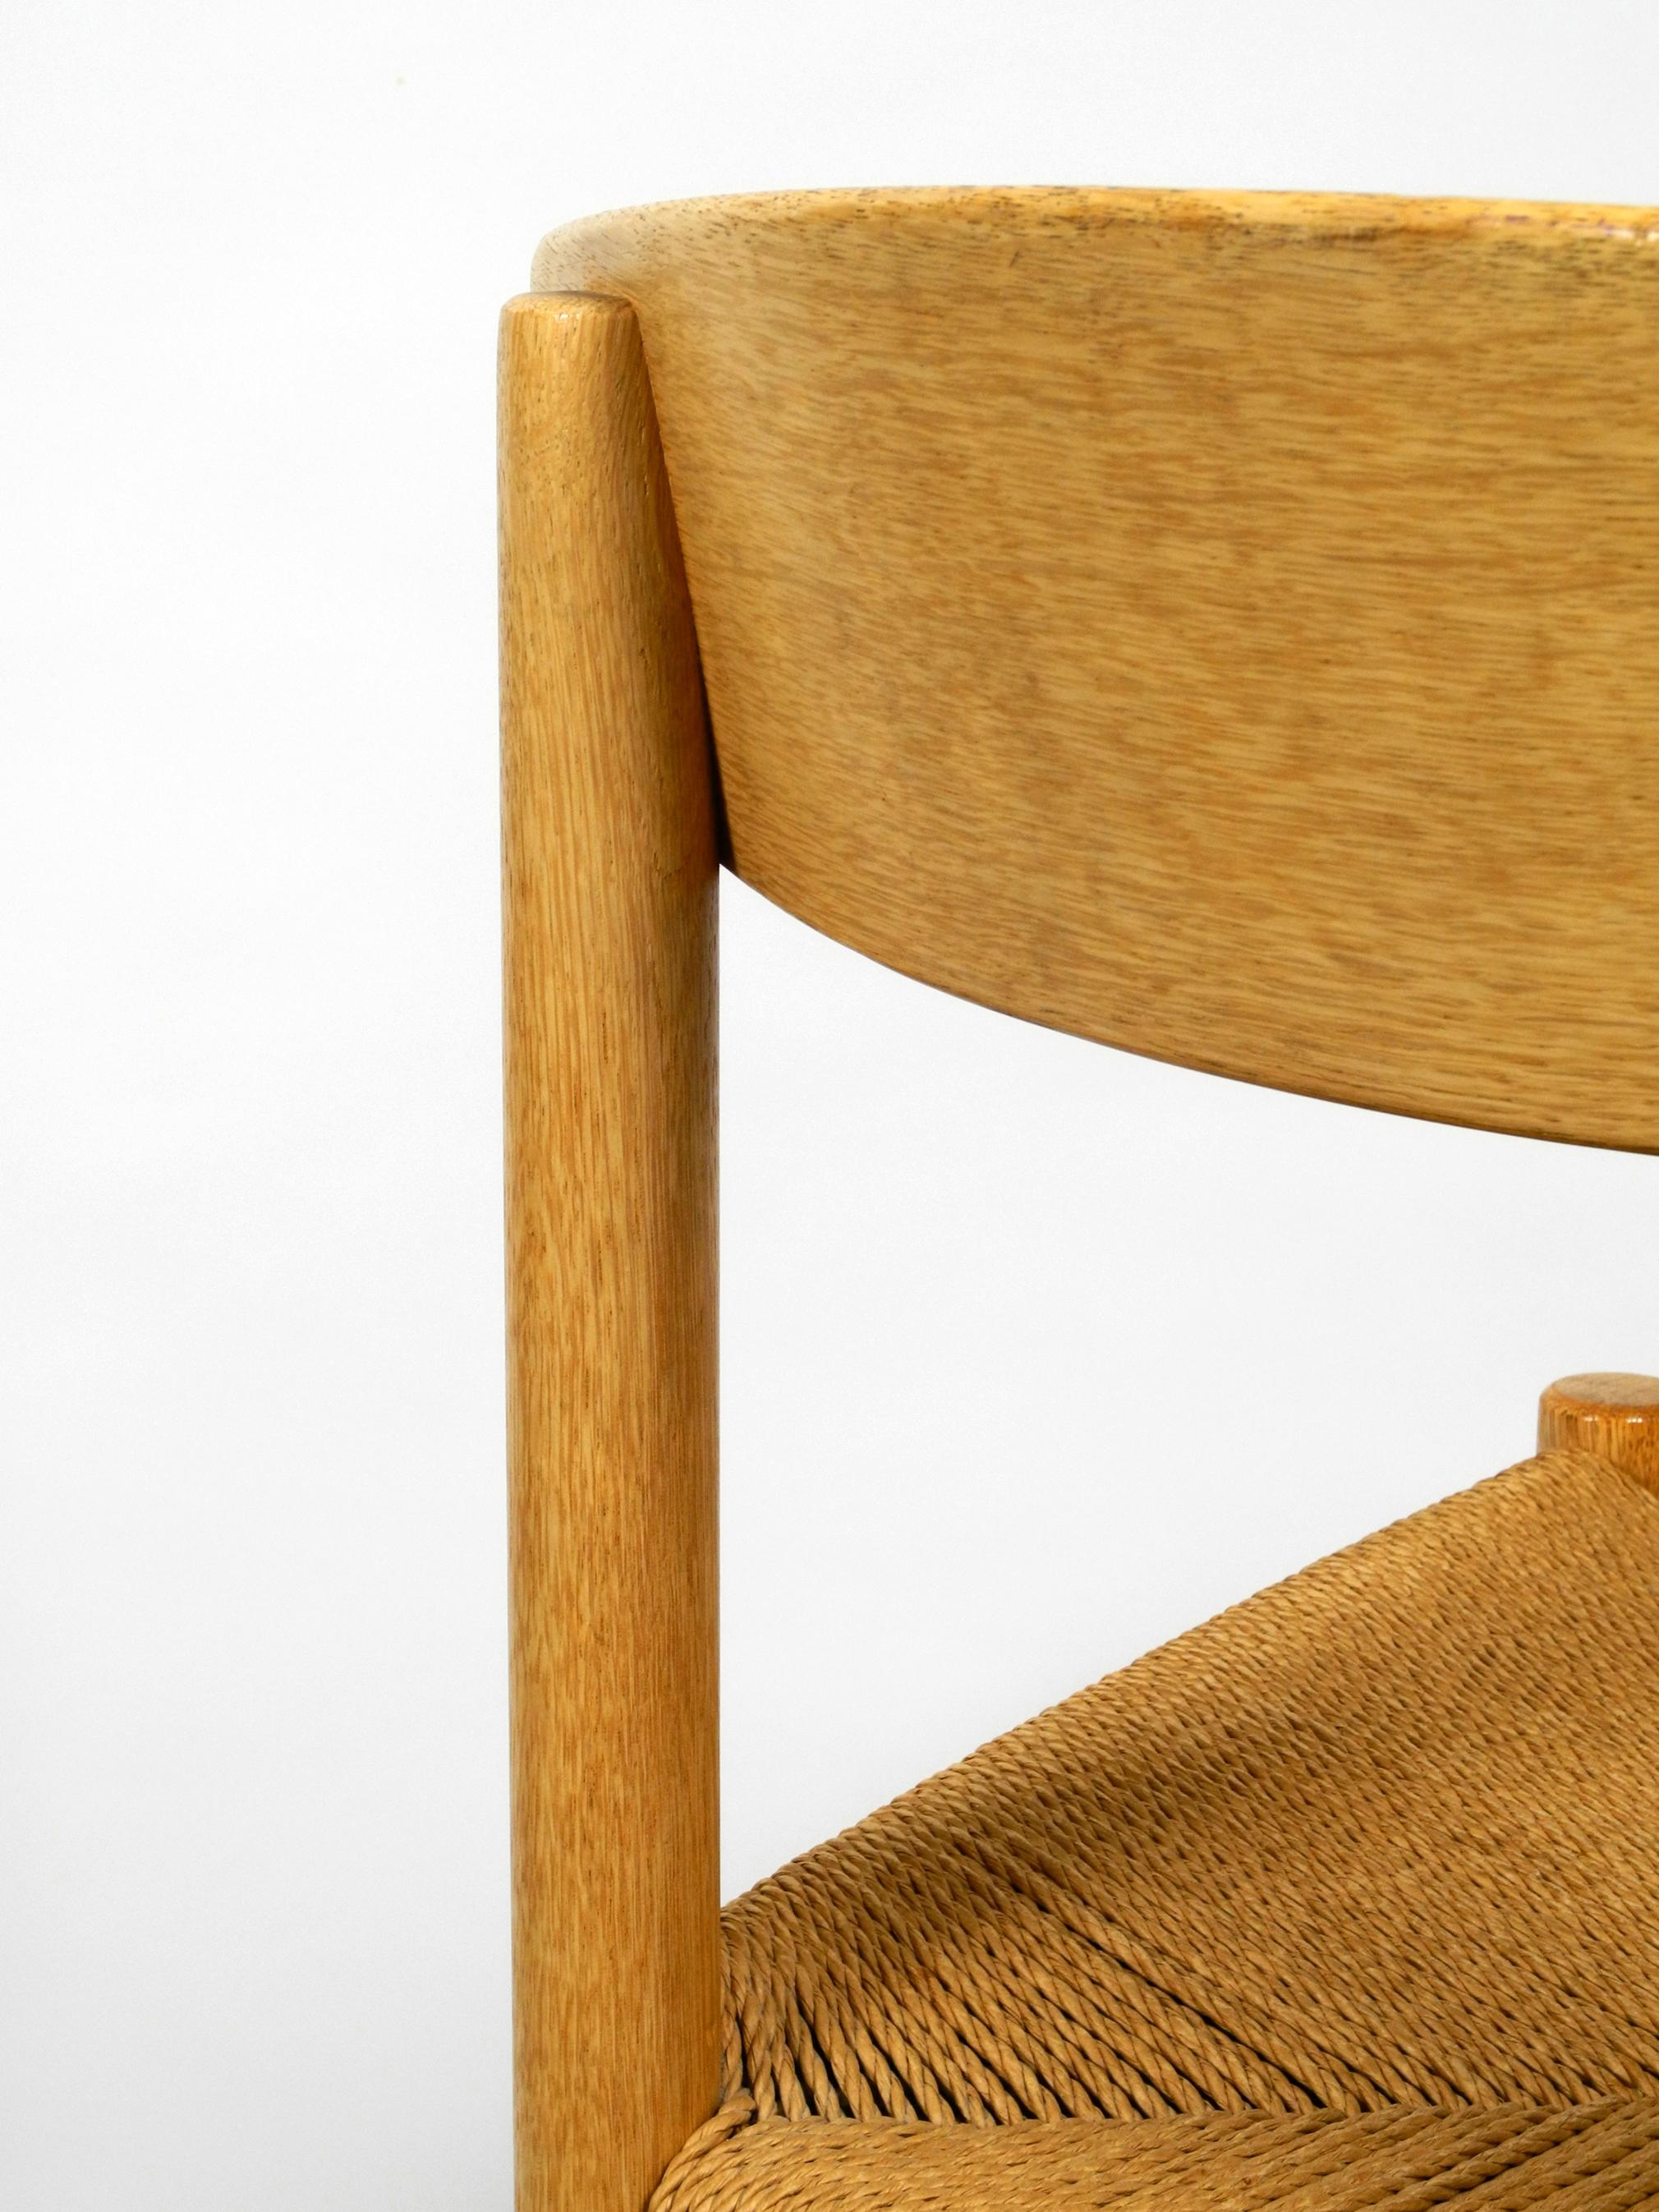 Four J39 Mogensen Chairs in Oak and Cord Weaving by Børge Mogensen Fredericia 5